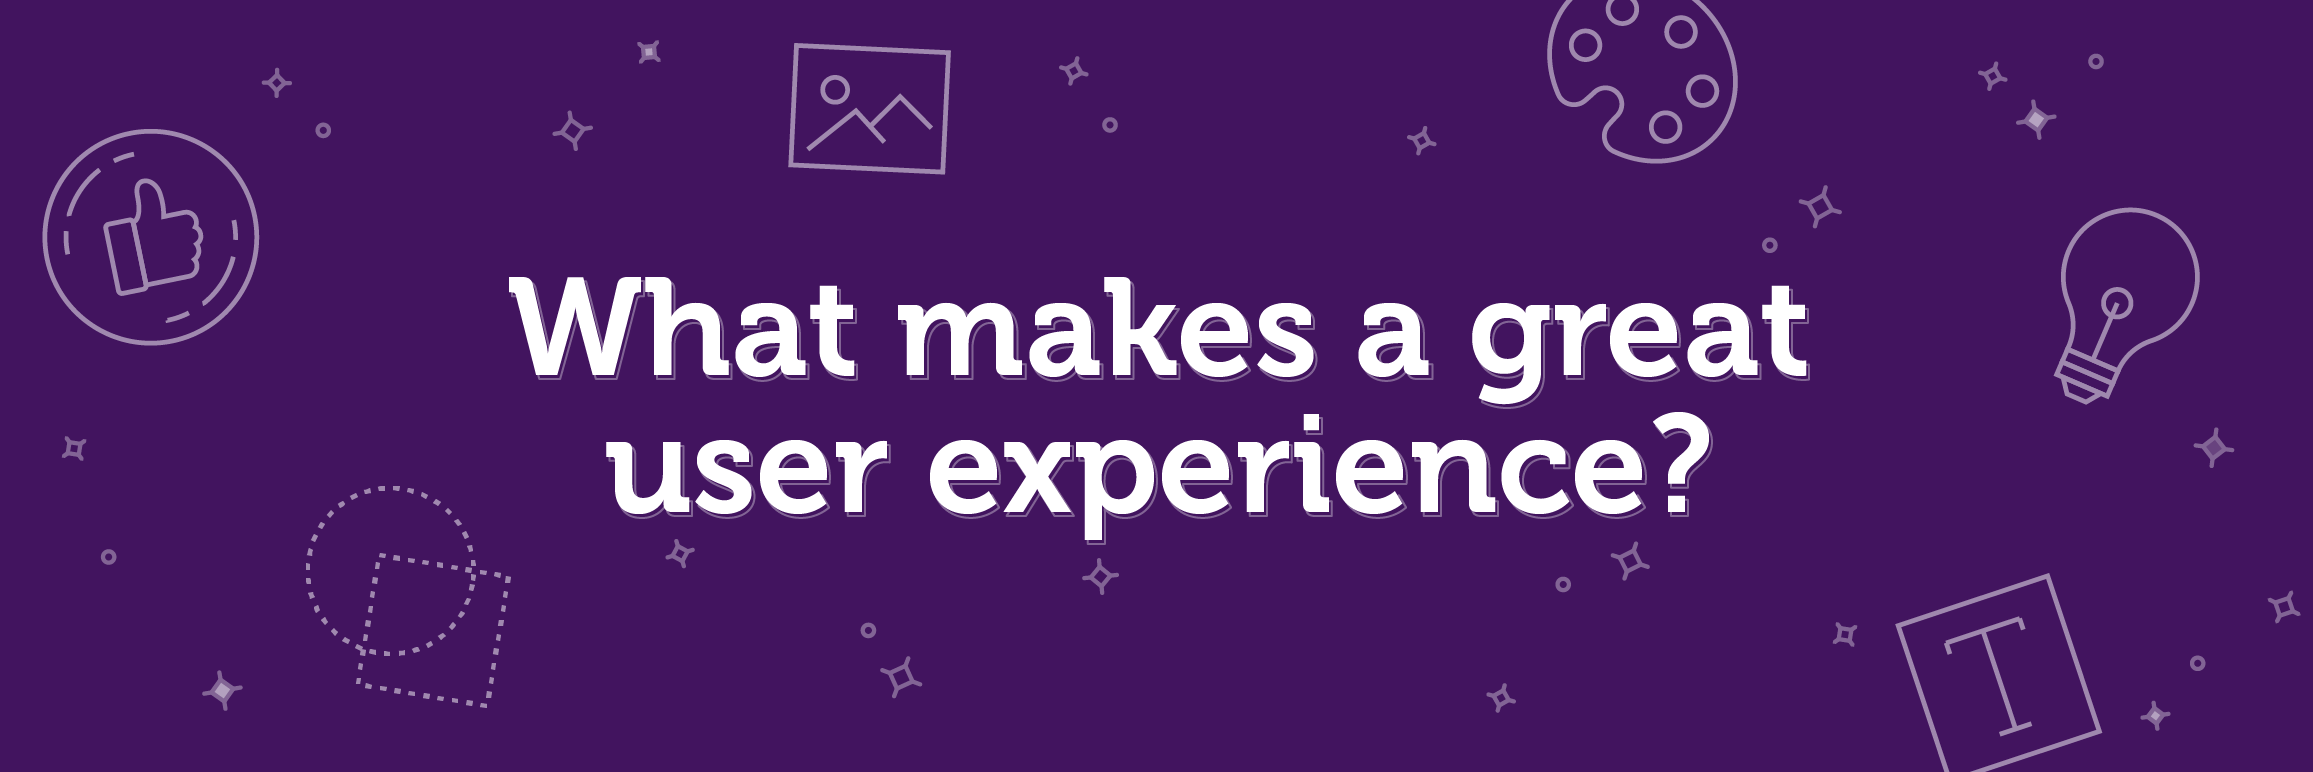 What makes a great user experience